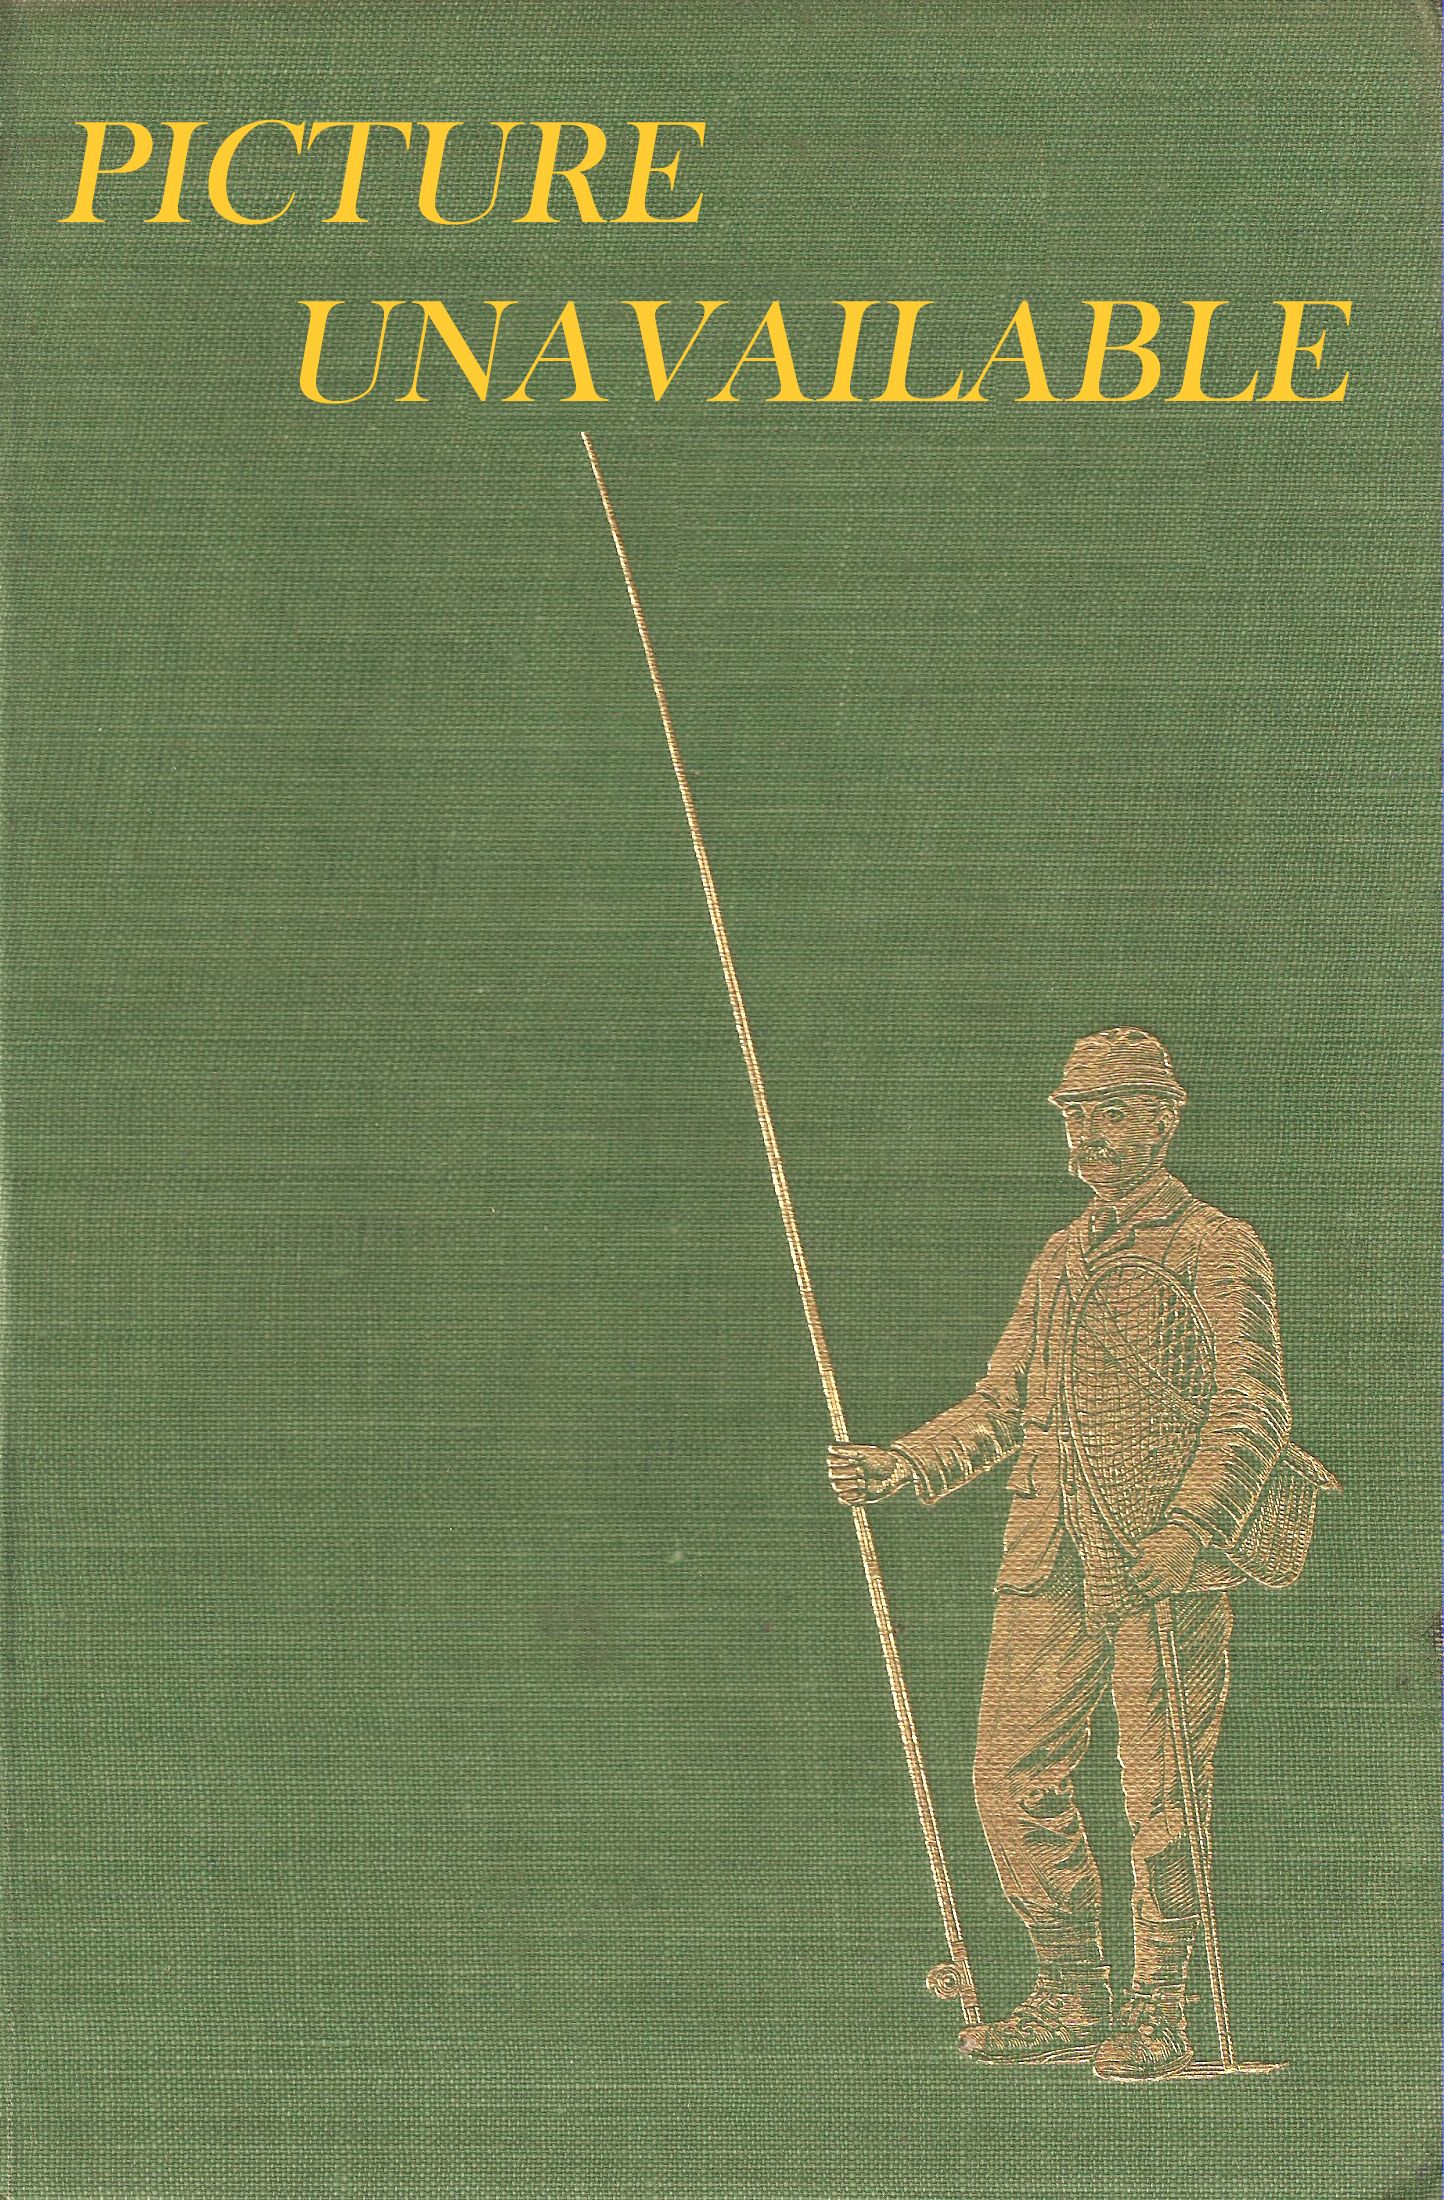 THE FARMER'S BOOK OF FIELD SPORTS. Edited by Colin Willock.